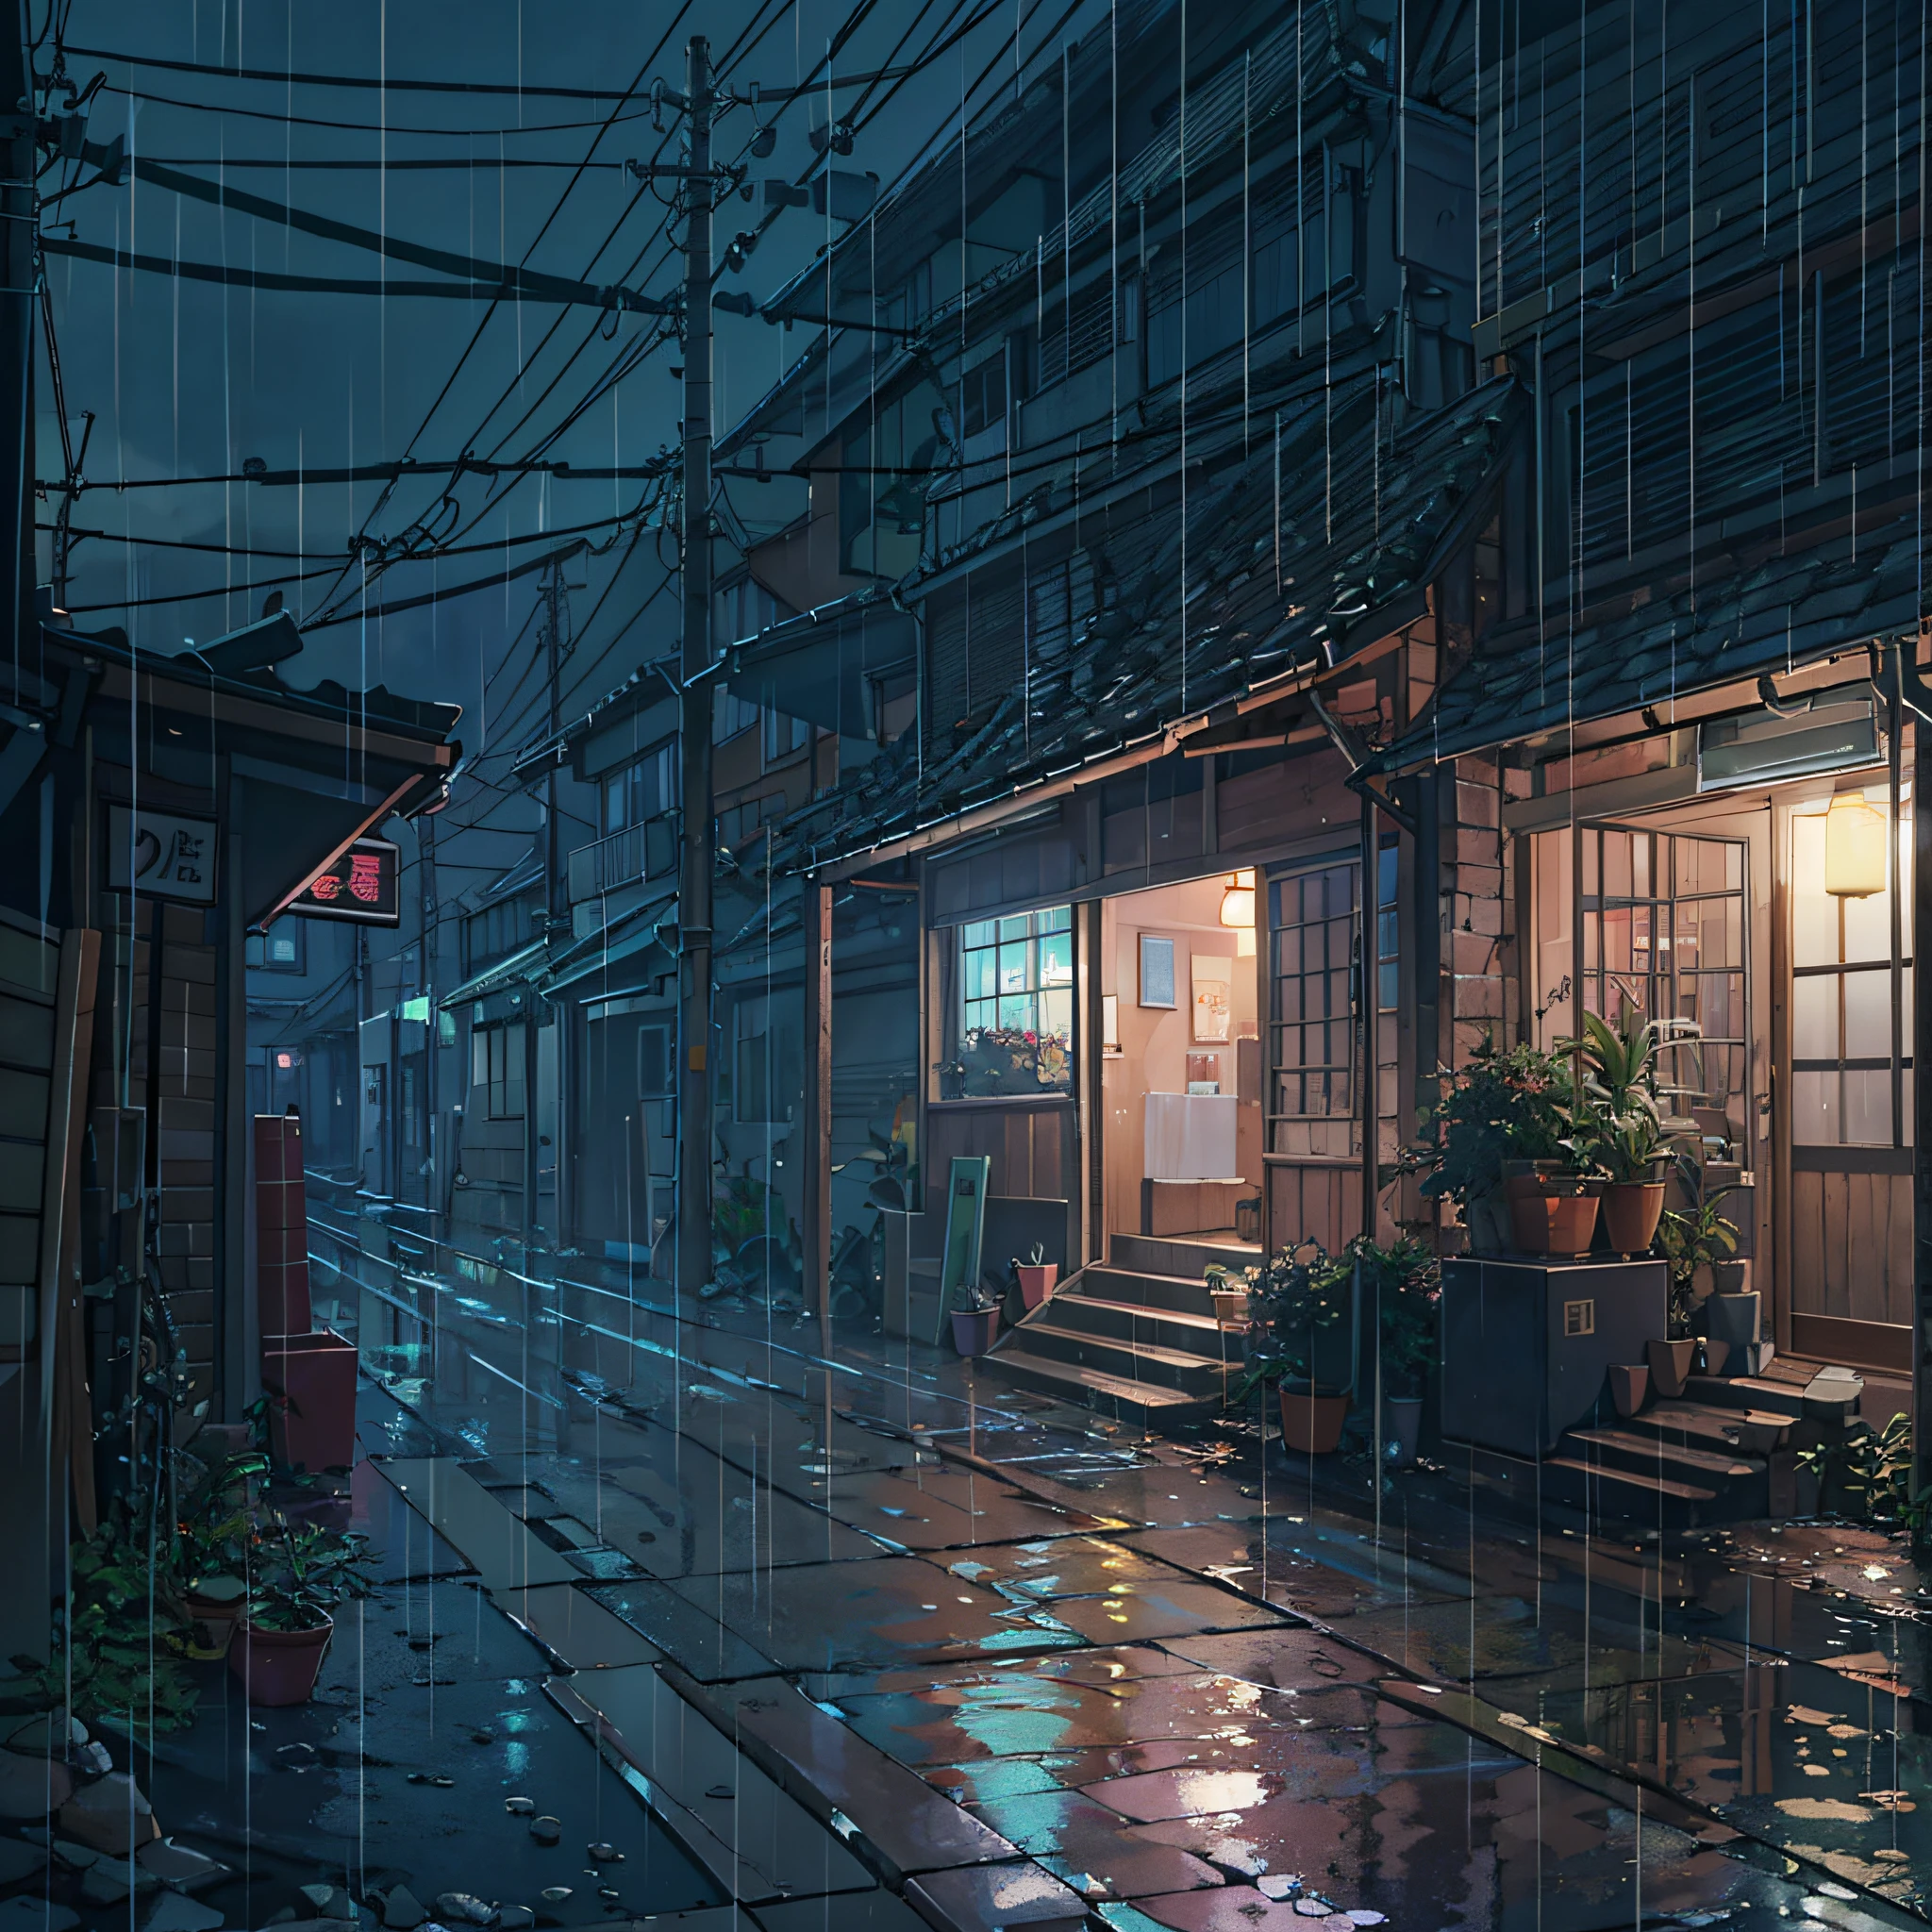 Morning，An apartment downstairs，In heavy rain，There were no people on the streets，Only torrential rain poured down，the night，concept art inspired by Makoto Shinkai，best qualtiy，beautiful anime scenes，anime scene，Movie anime scenes，the night，Fantasy anime，atmospheric anime，Detail Enhancement。